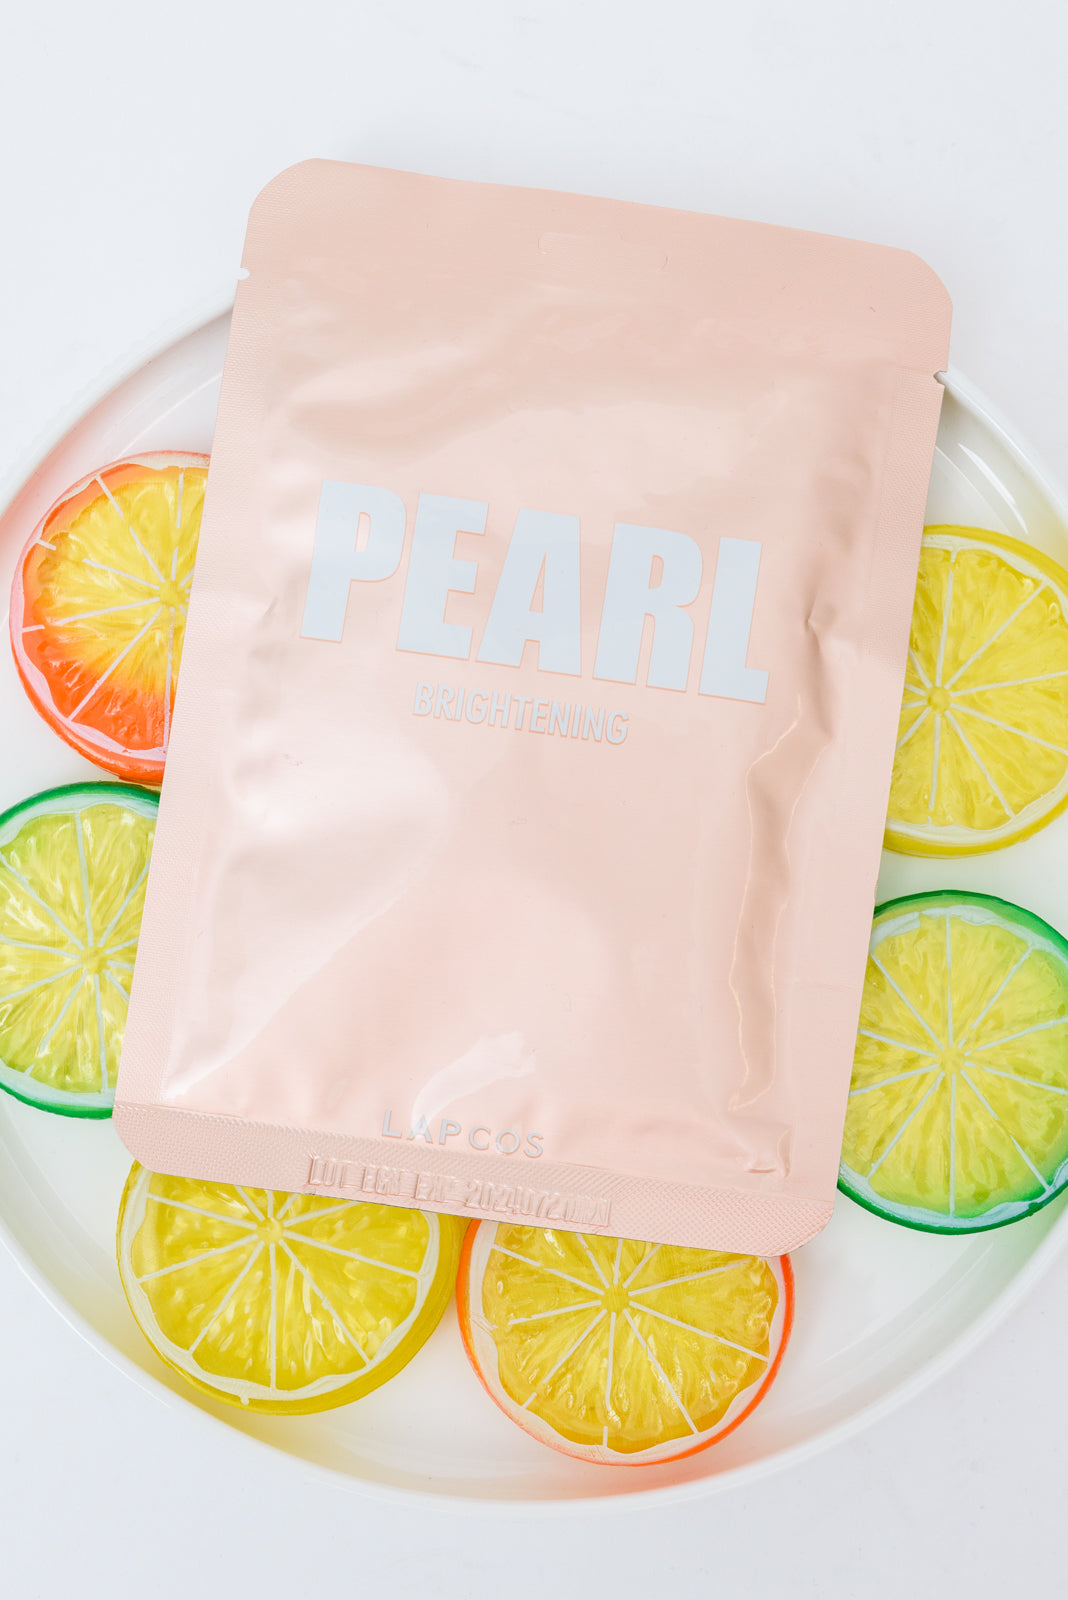 Stay Bright Pearl Mask